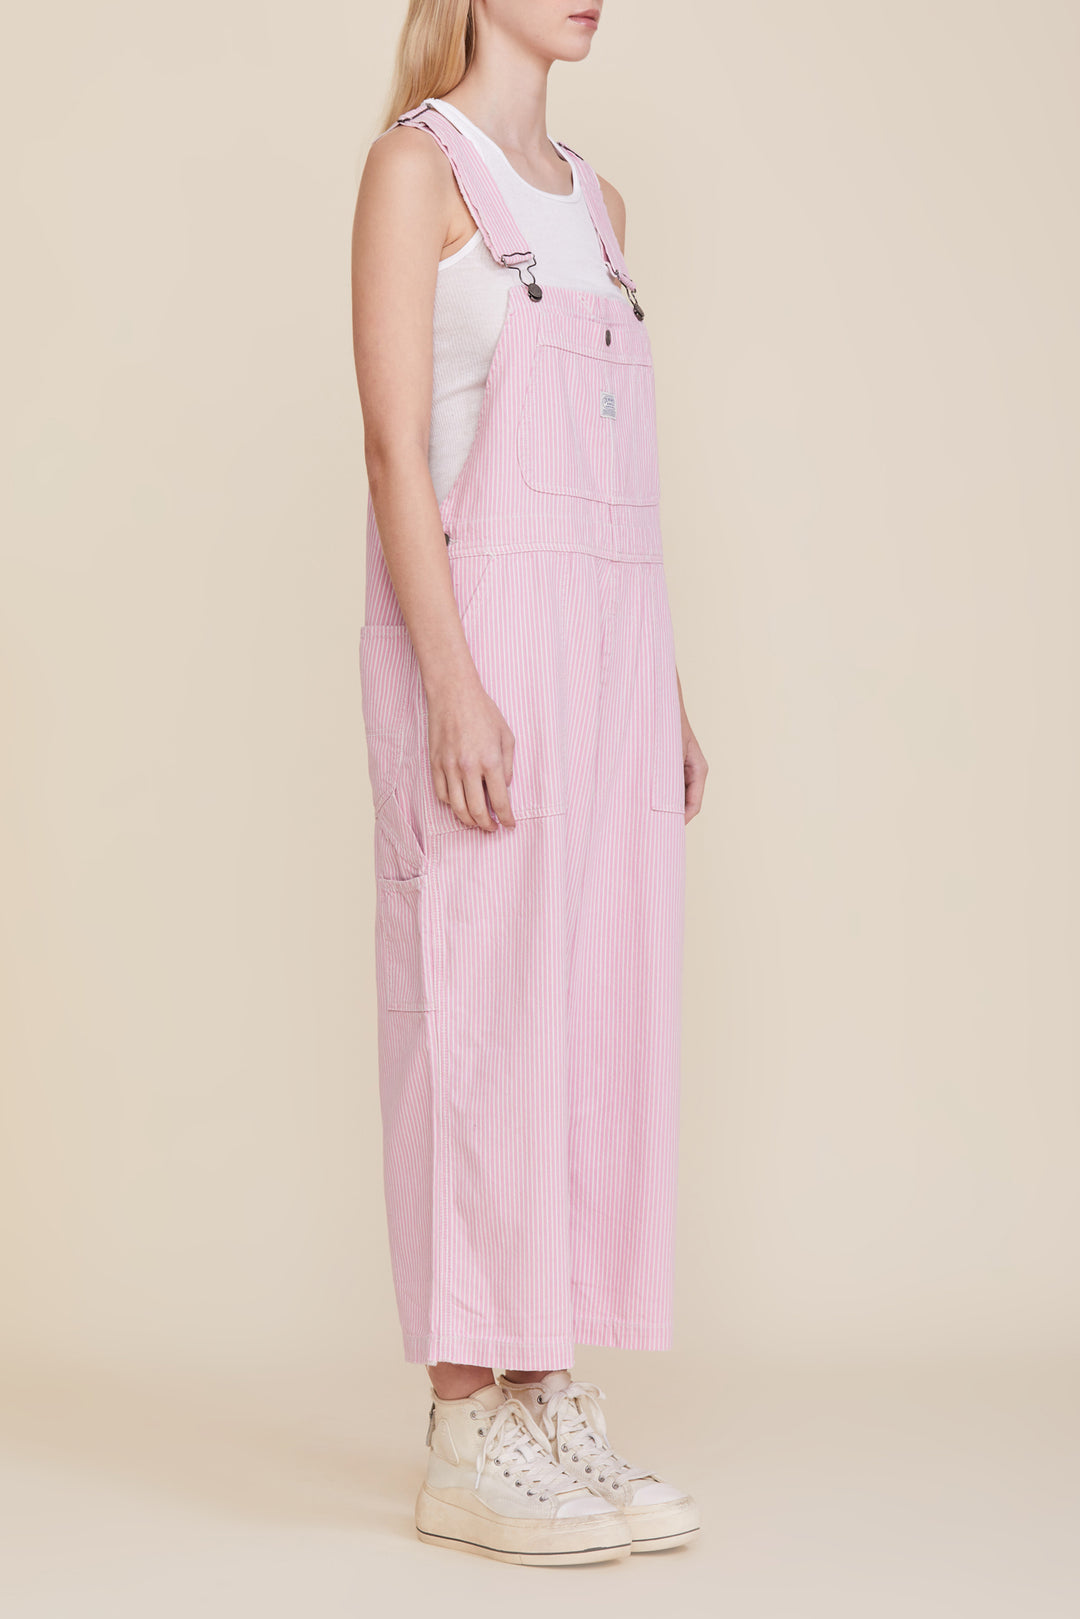 Relaxed Overall - Pink Railroad Stripe